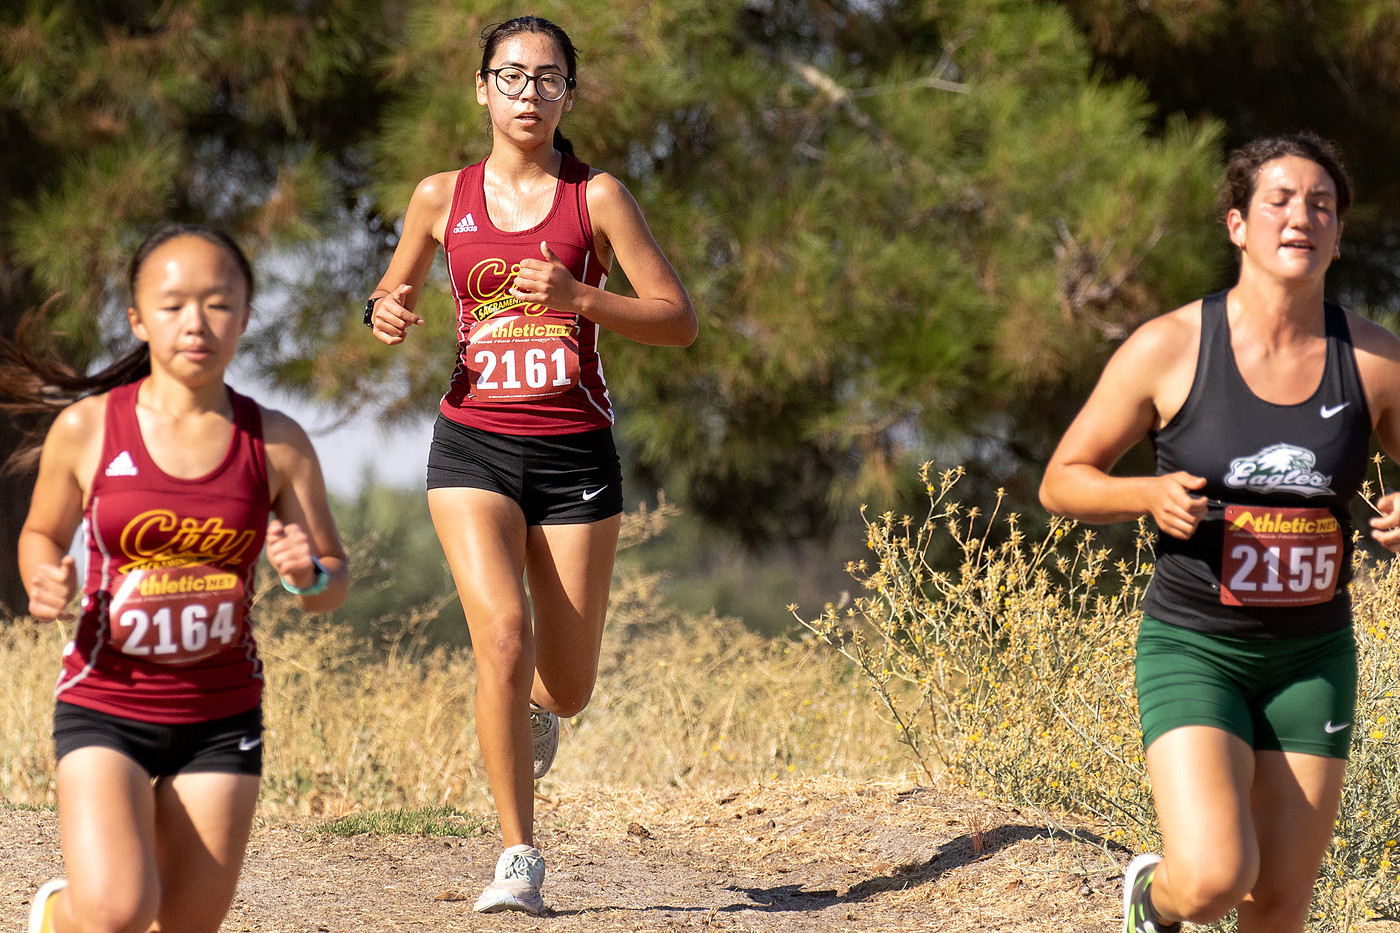 Mejia and Wong represent the Panthers at the CCCAA State Championship and finish 79th and 95th respectively (out of 167 finishers)